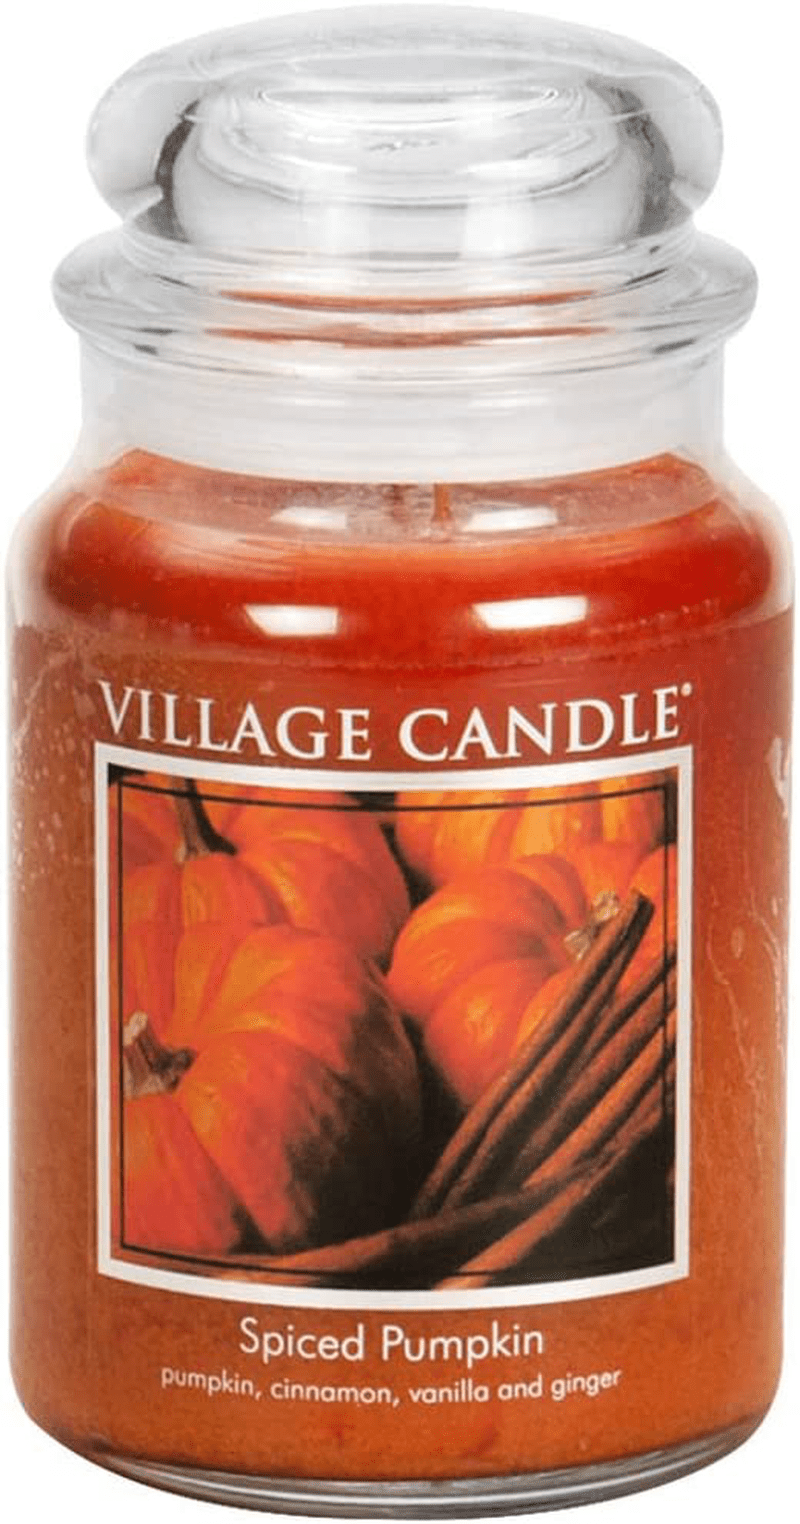 Village Candle Spiced Pumpkin Large Apothecary Jar, Scented Candle, 21.25 oz. Home & Garden > Decor > Seasonal & Holiday Decorations& Garden > Decor > Seasonal & Holiday Decorations Village Candle   